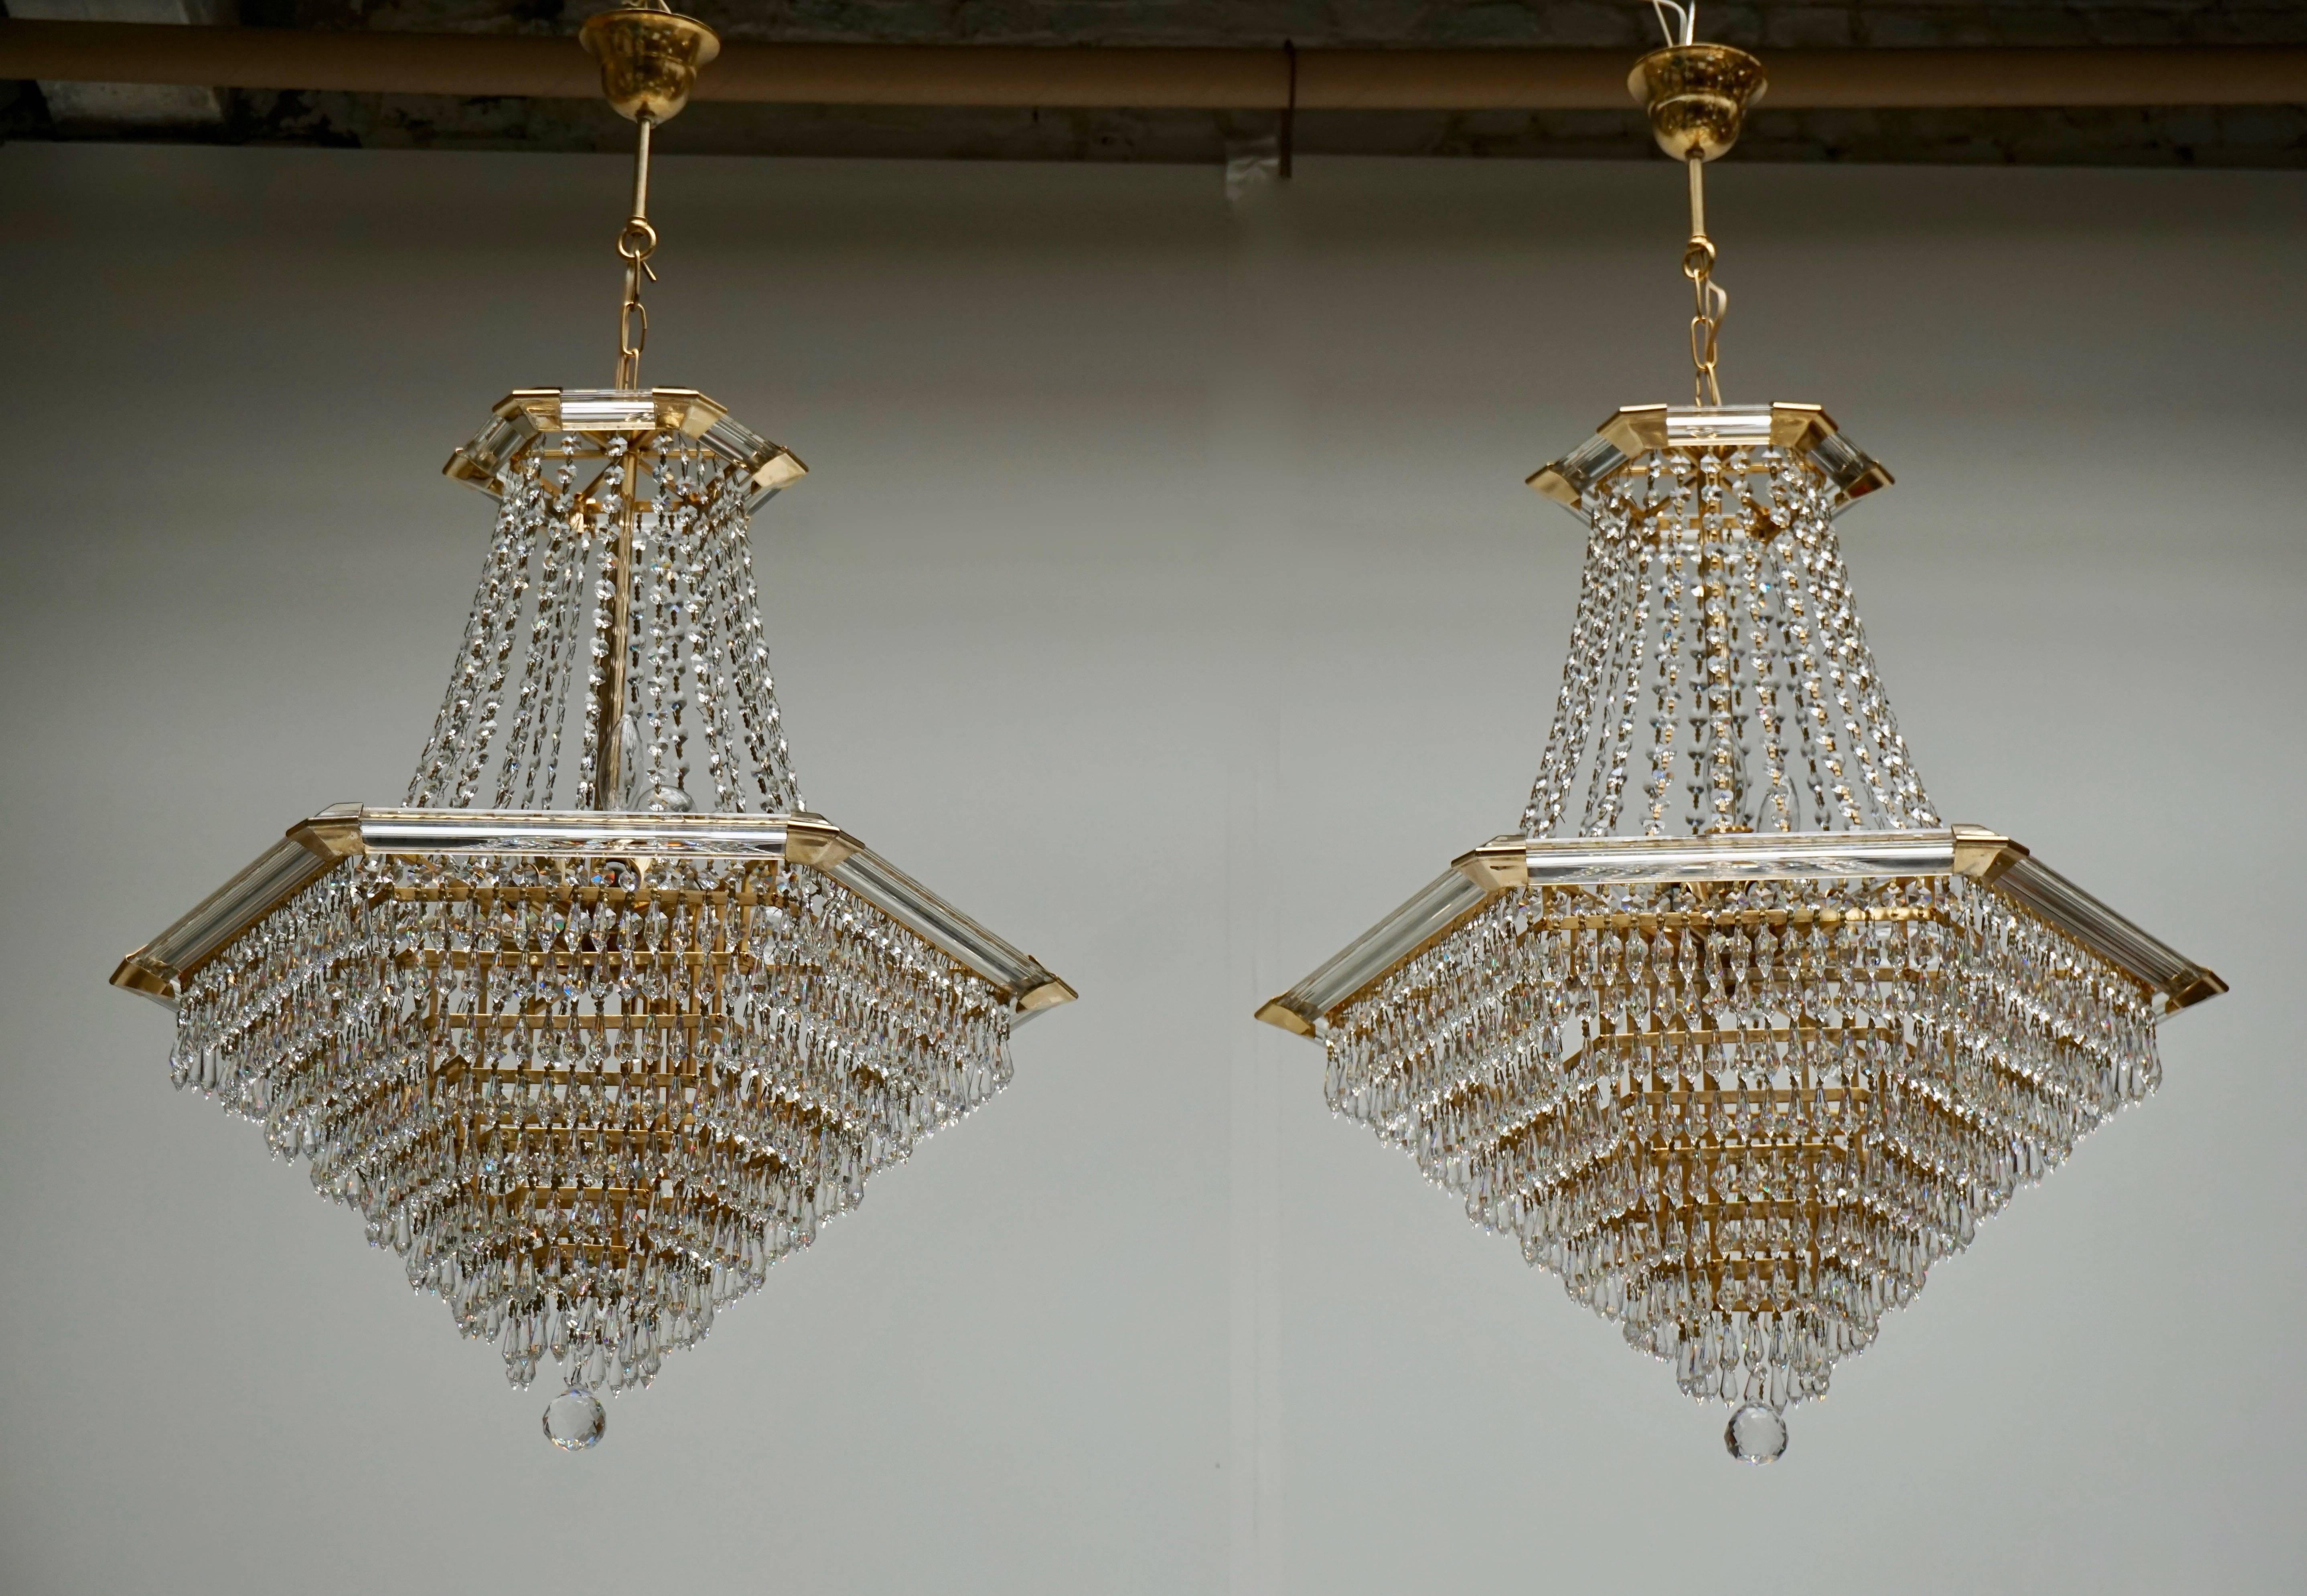 Two very exclusive and high quality chandeliers by Bakalowits & Söhne, Austria, manufactured in midcentury, circa 1960. They are made of a gold-plated brass frame decorated with hundreds of faceted glass crystals.
Measures: Diameter 65 cm.
Height